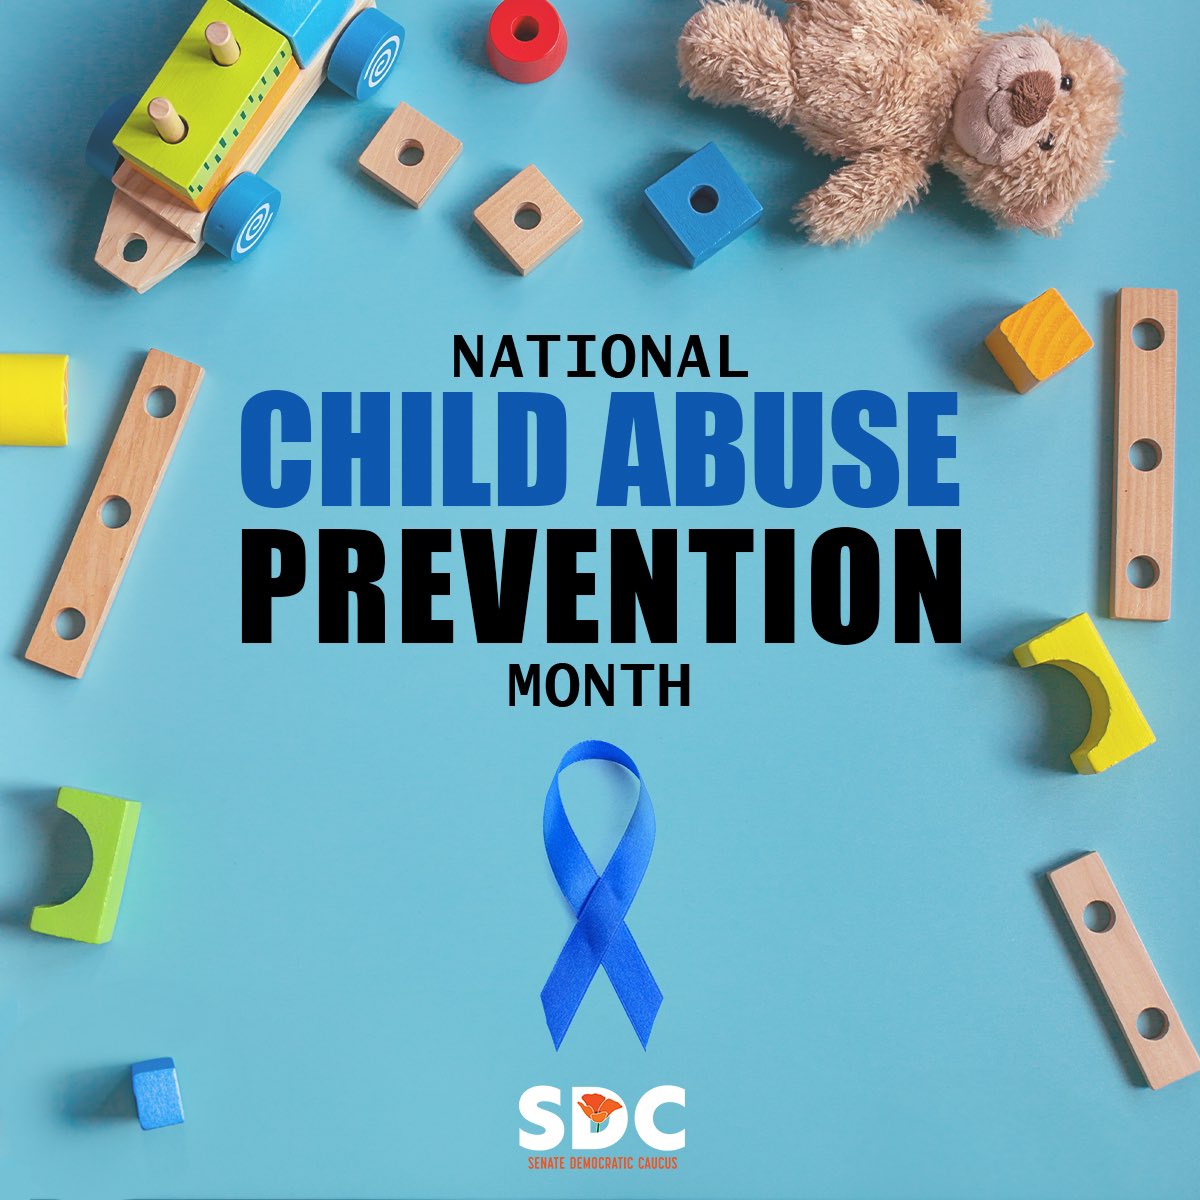 Child neglect is the most common form of child maltreatment. This month we raise awareness about preventing child abuse. If you suspect a child has been, or is in danger of, abuse or neglect, please speak up! #ChildAbusePreventionMonth